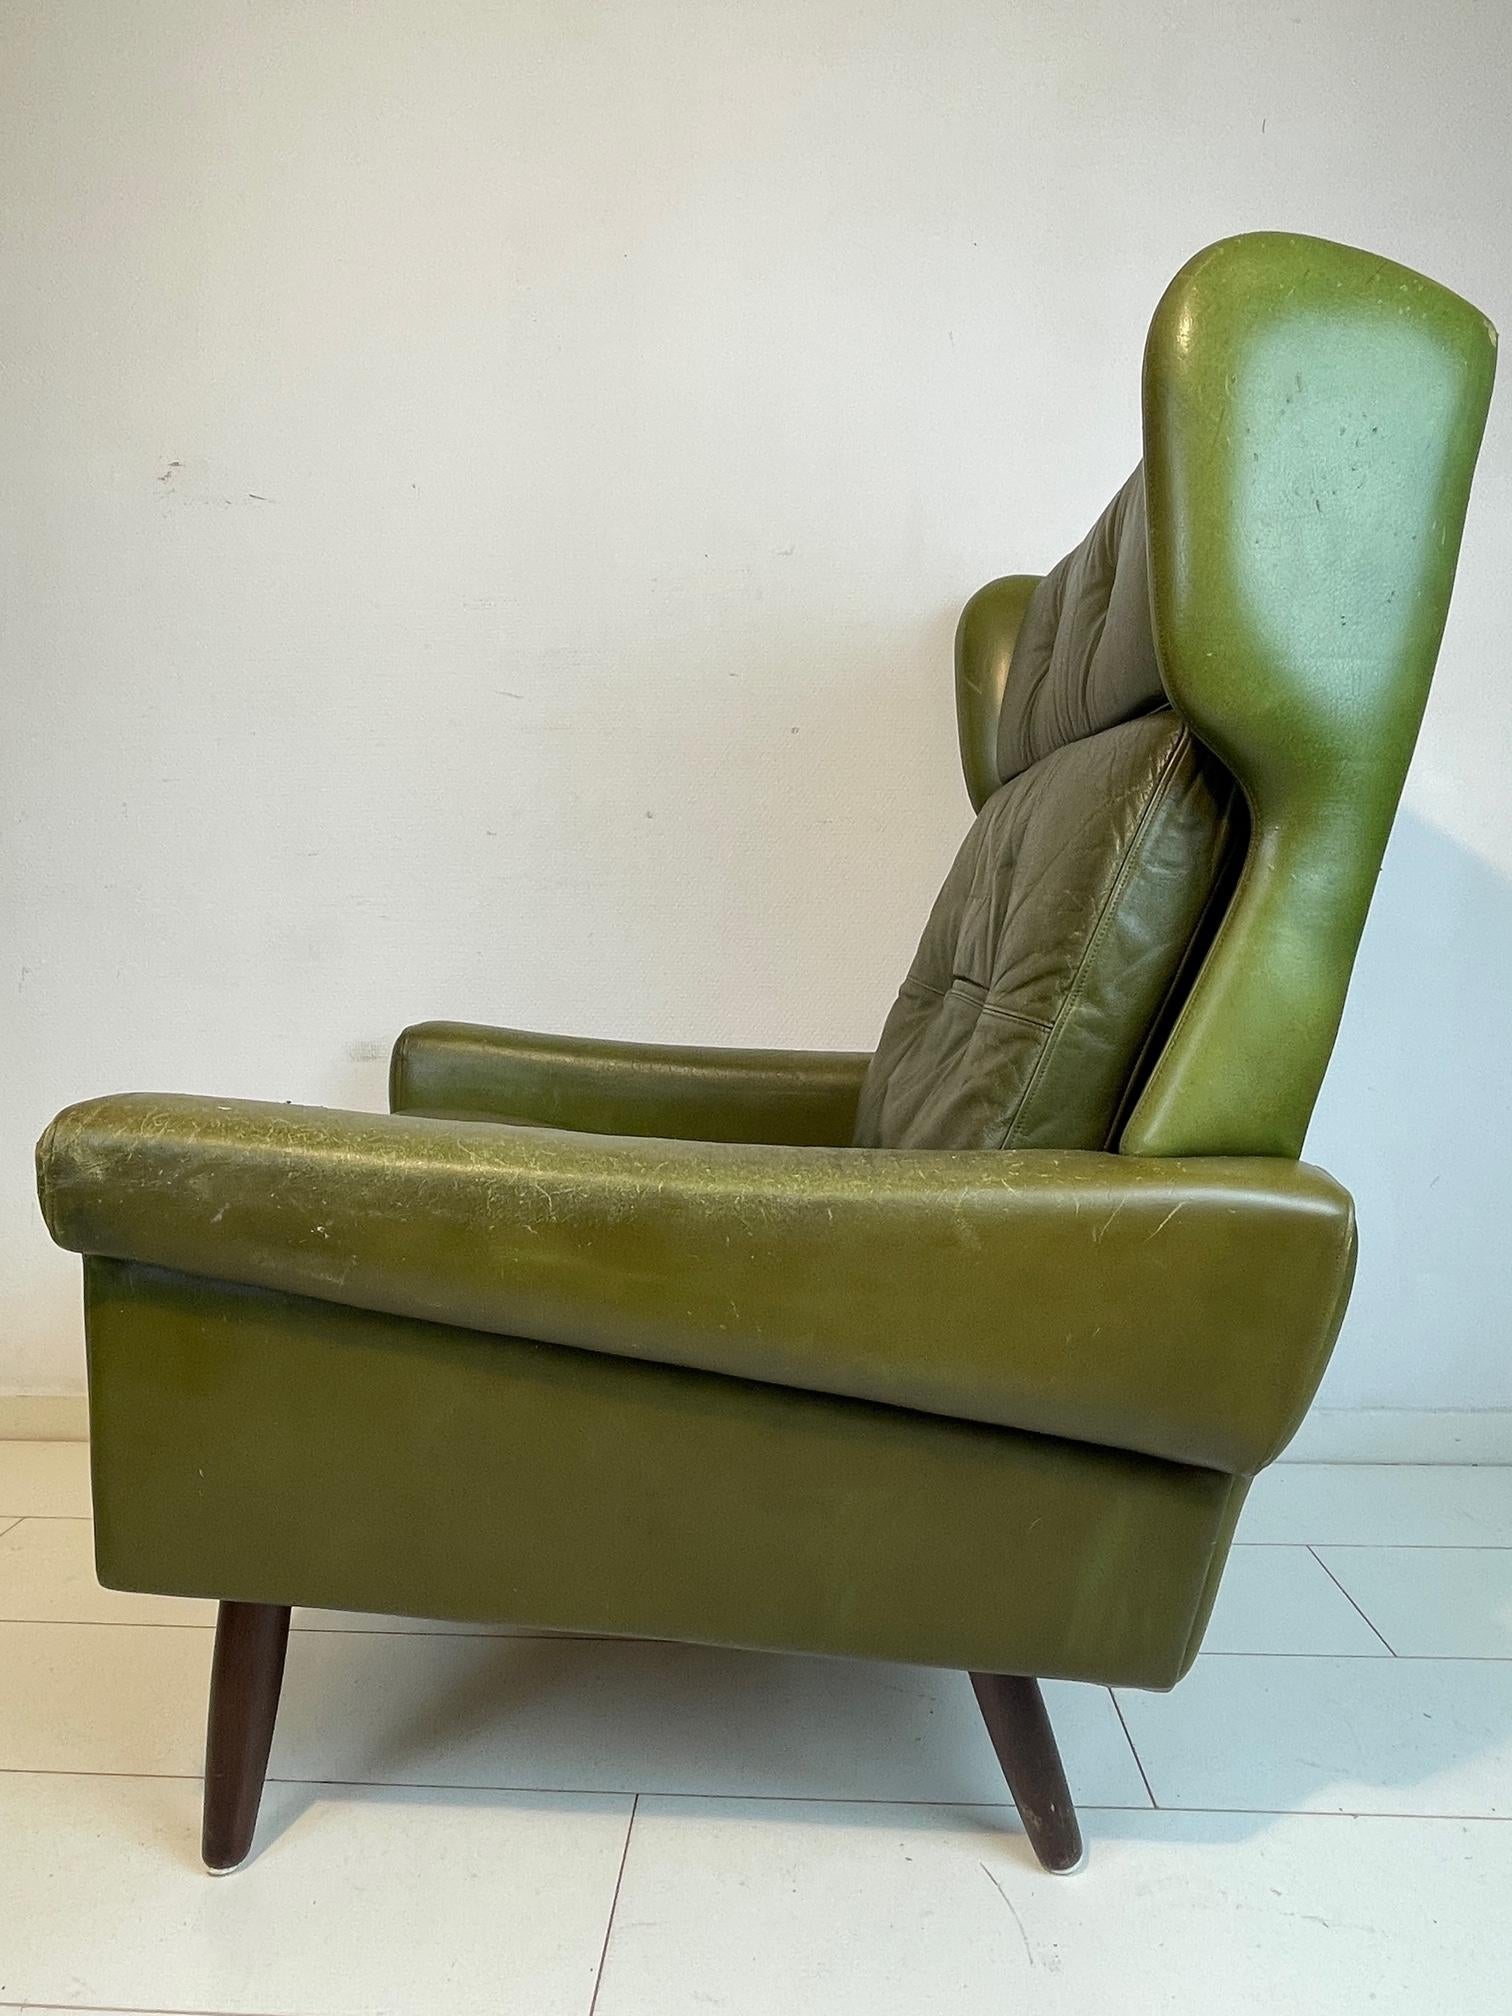 Scandinavian Modern Vintage wingback lounge chair by Svend Skipper, 1960’S Green Leather with hocker